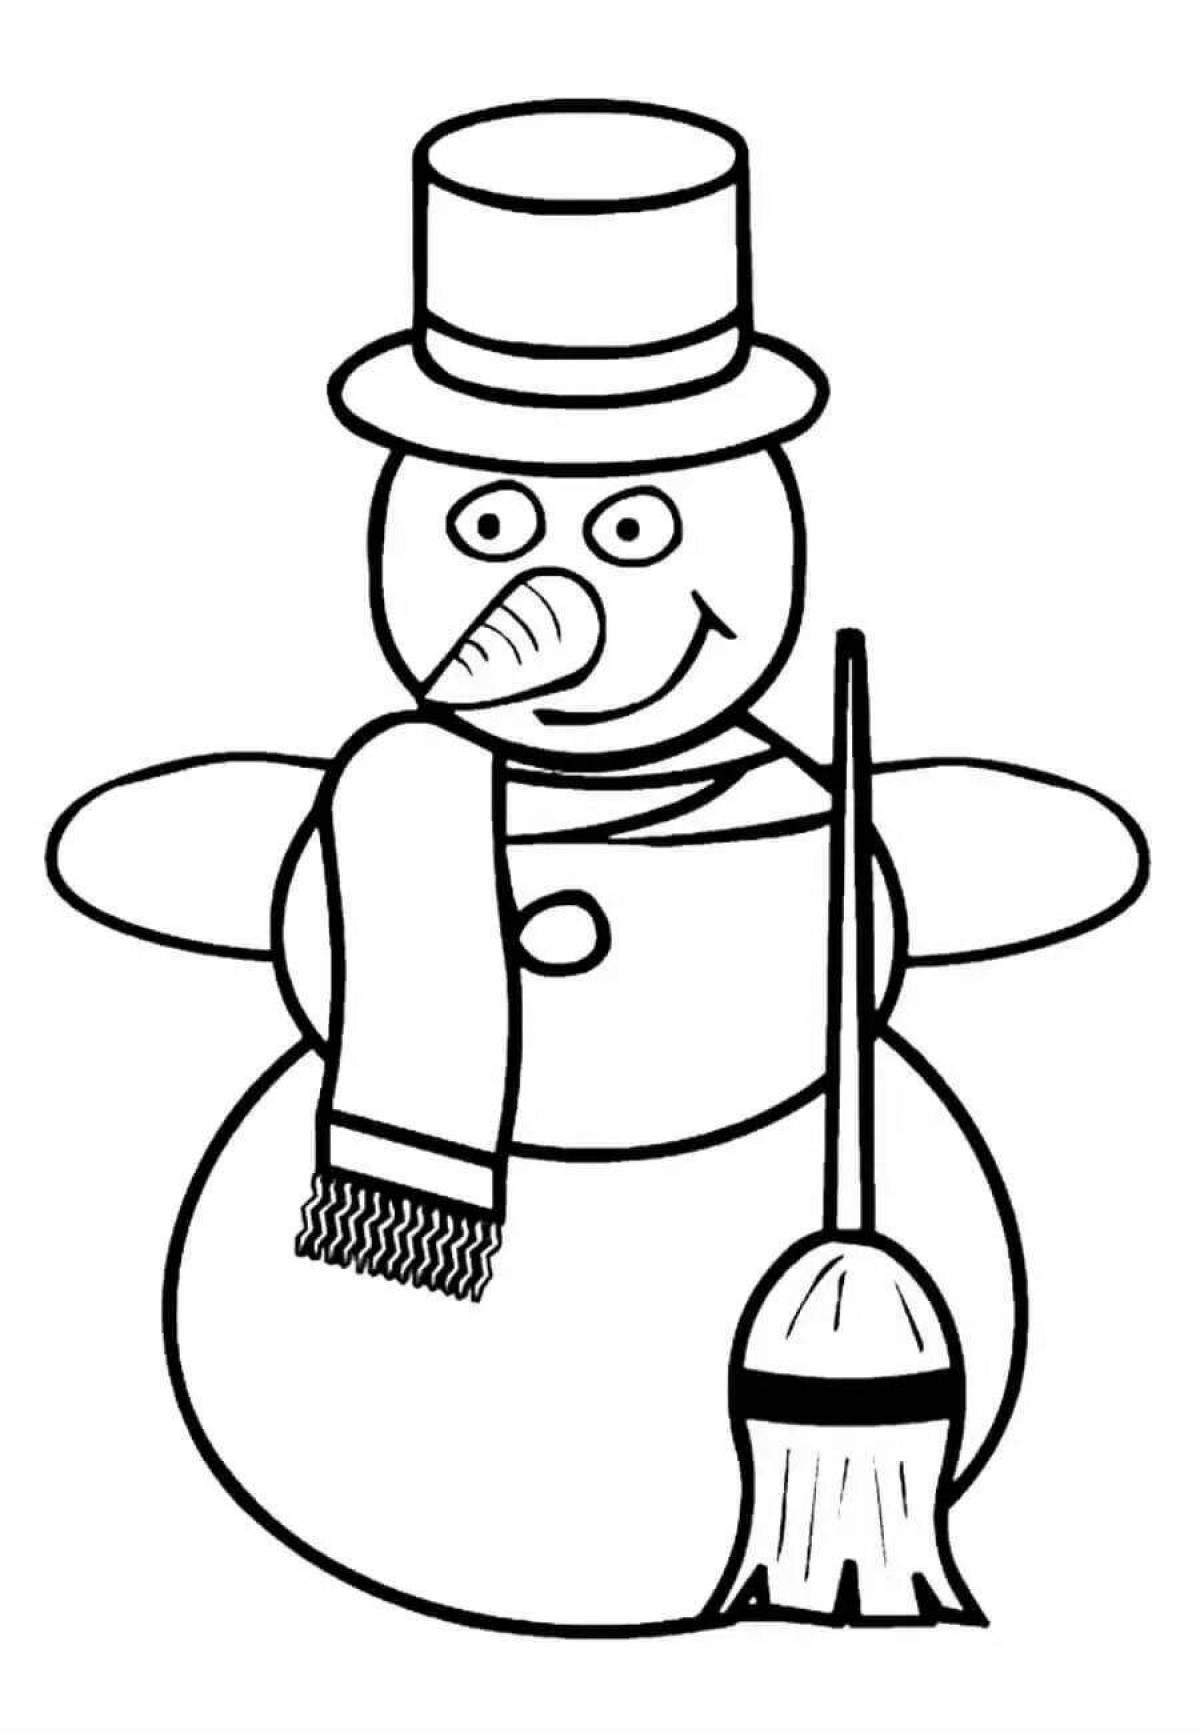 Fancy coloring snowman with a broom